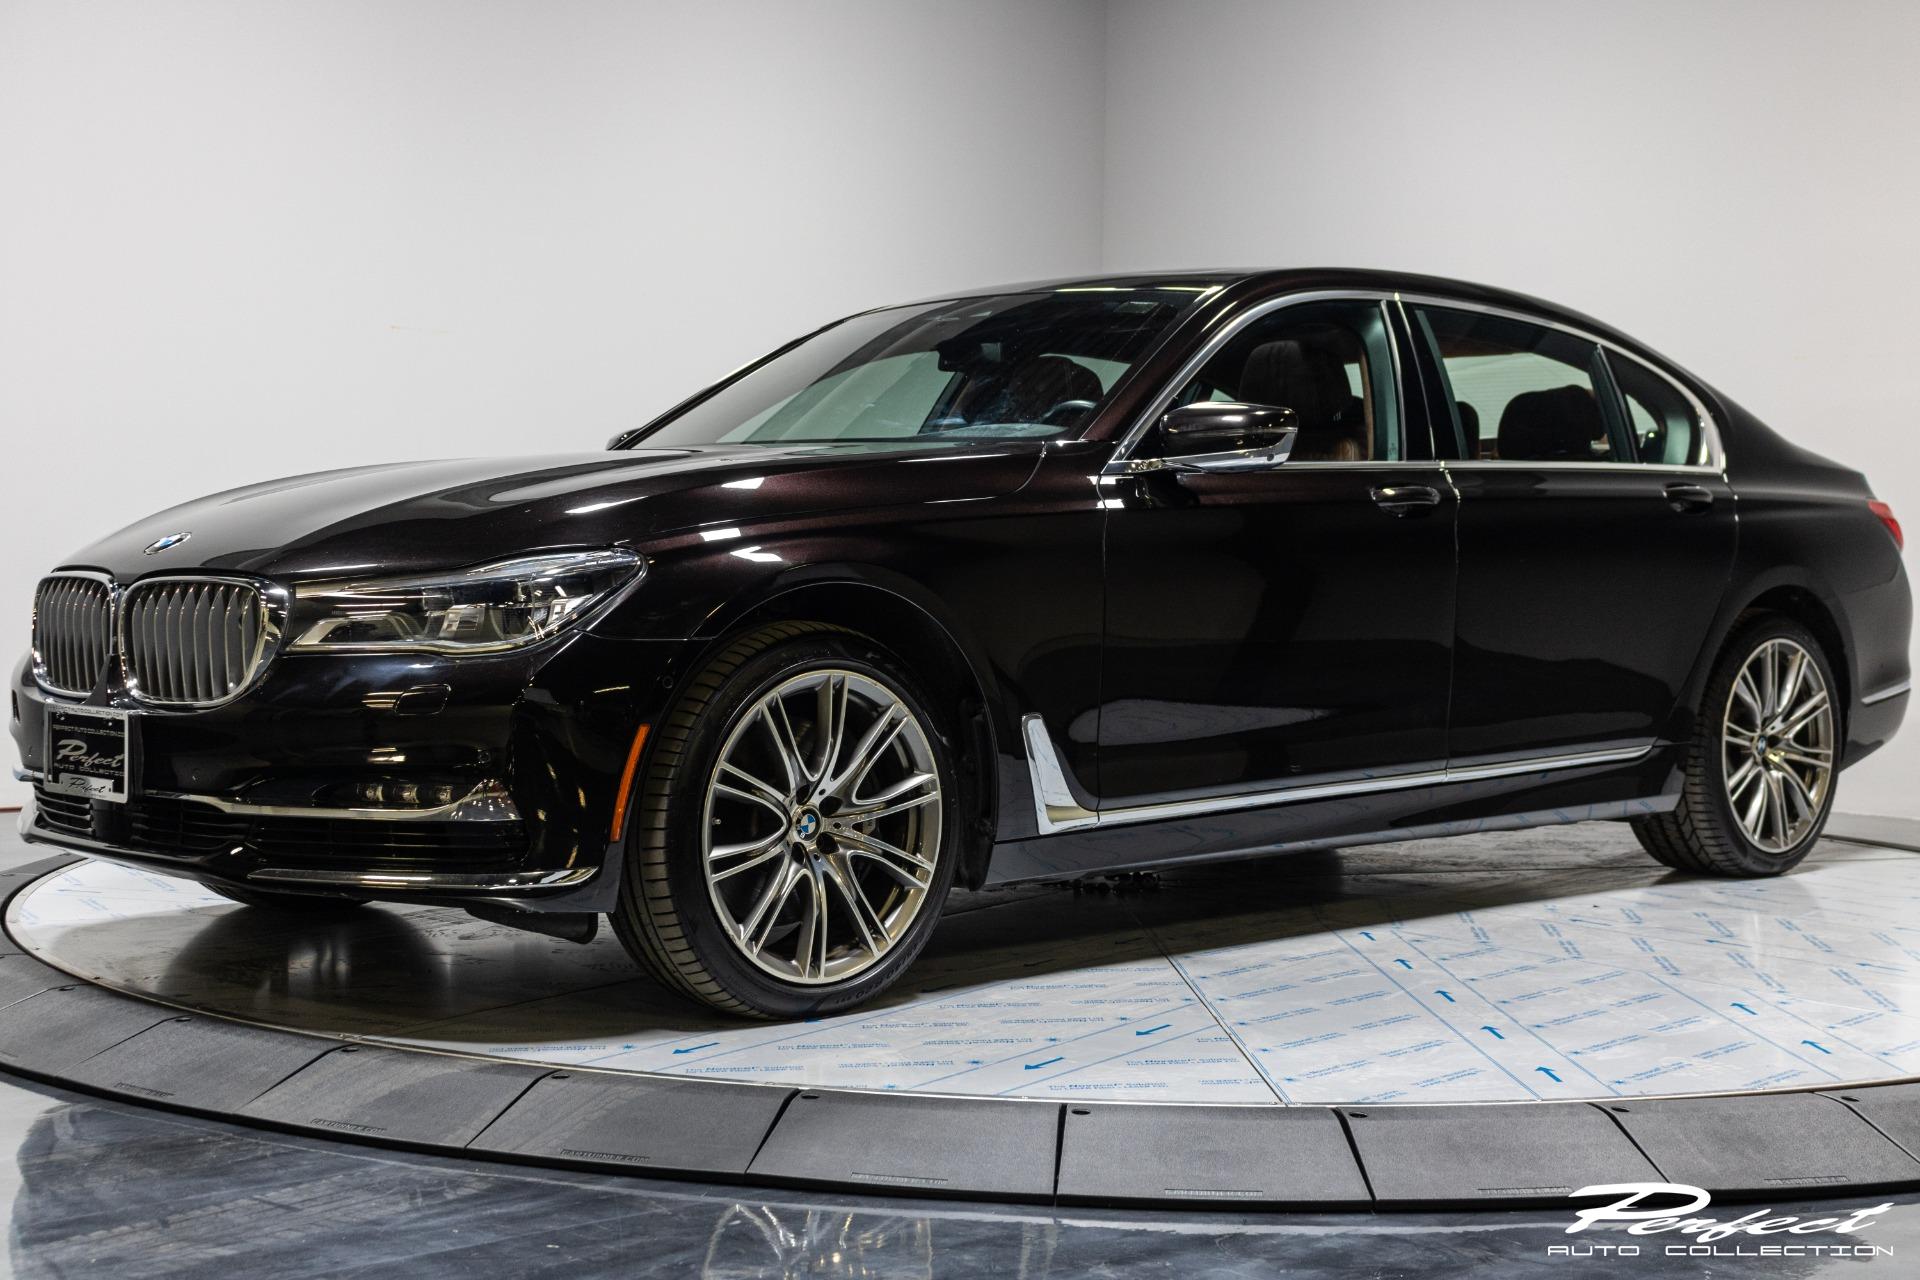 The Ultimate Luxury: The 2016 BMW 7 Series